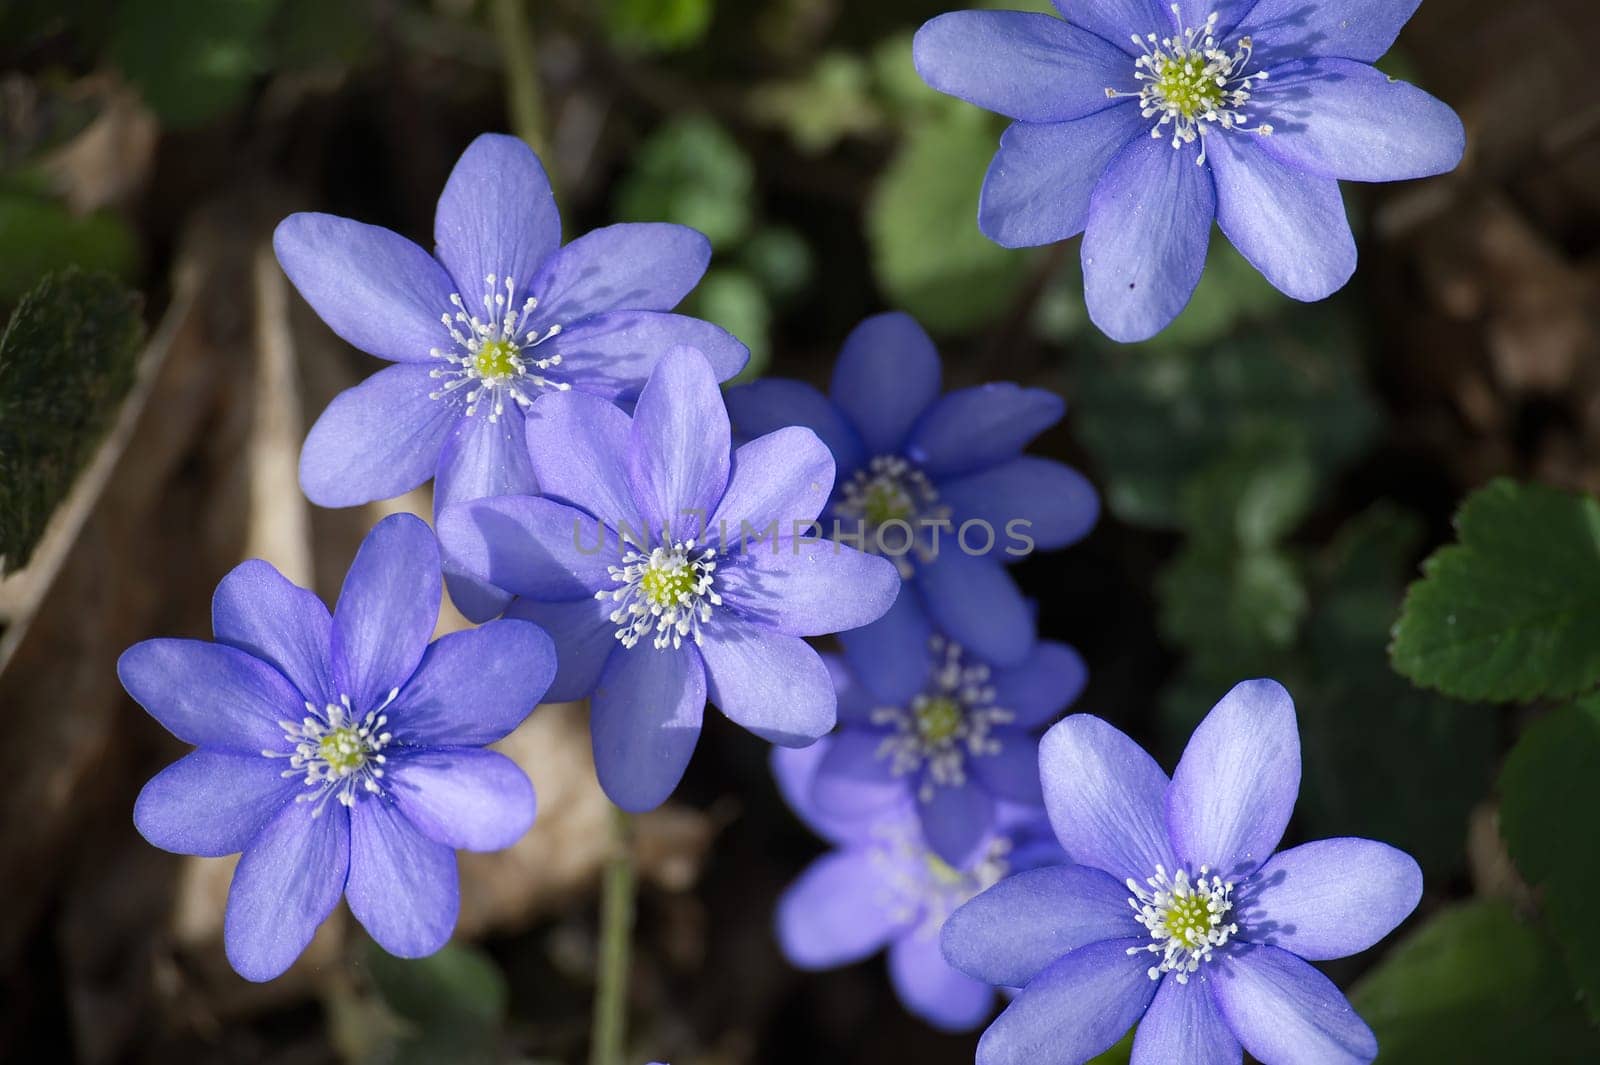 Close up of a group of Blue Hepatica flowers surrounded by green leaves